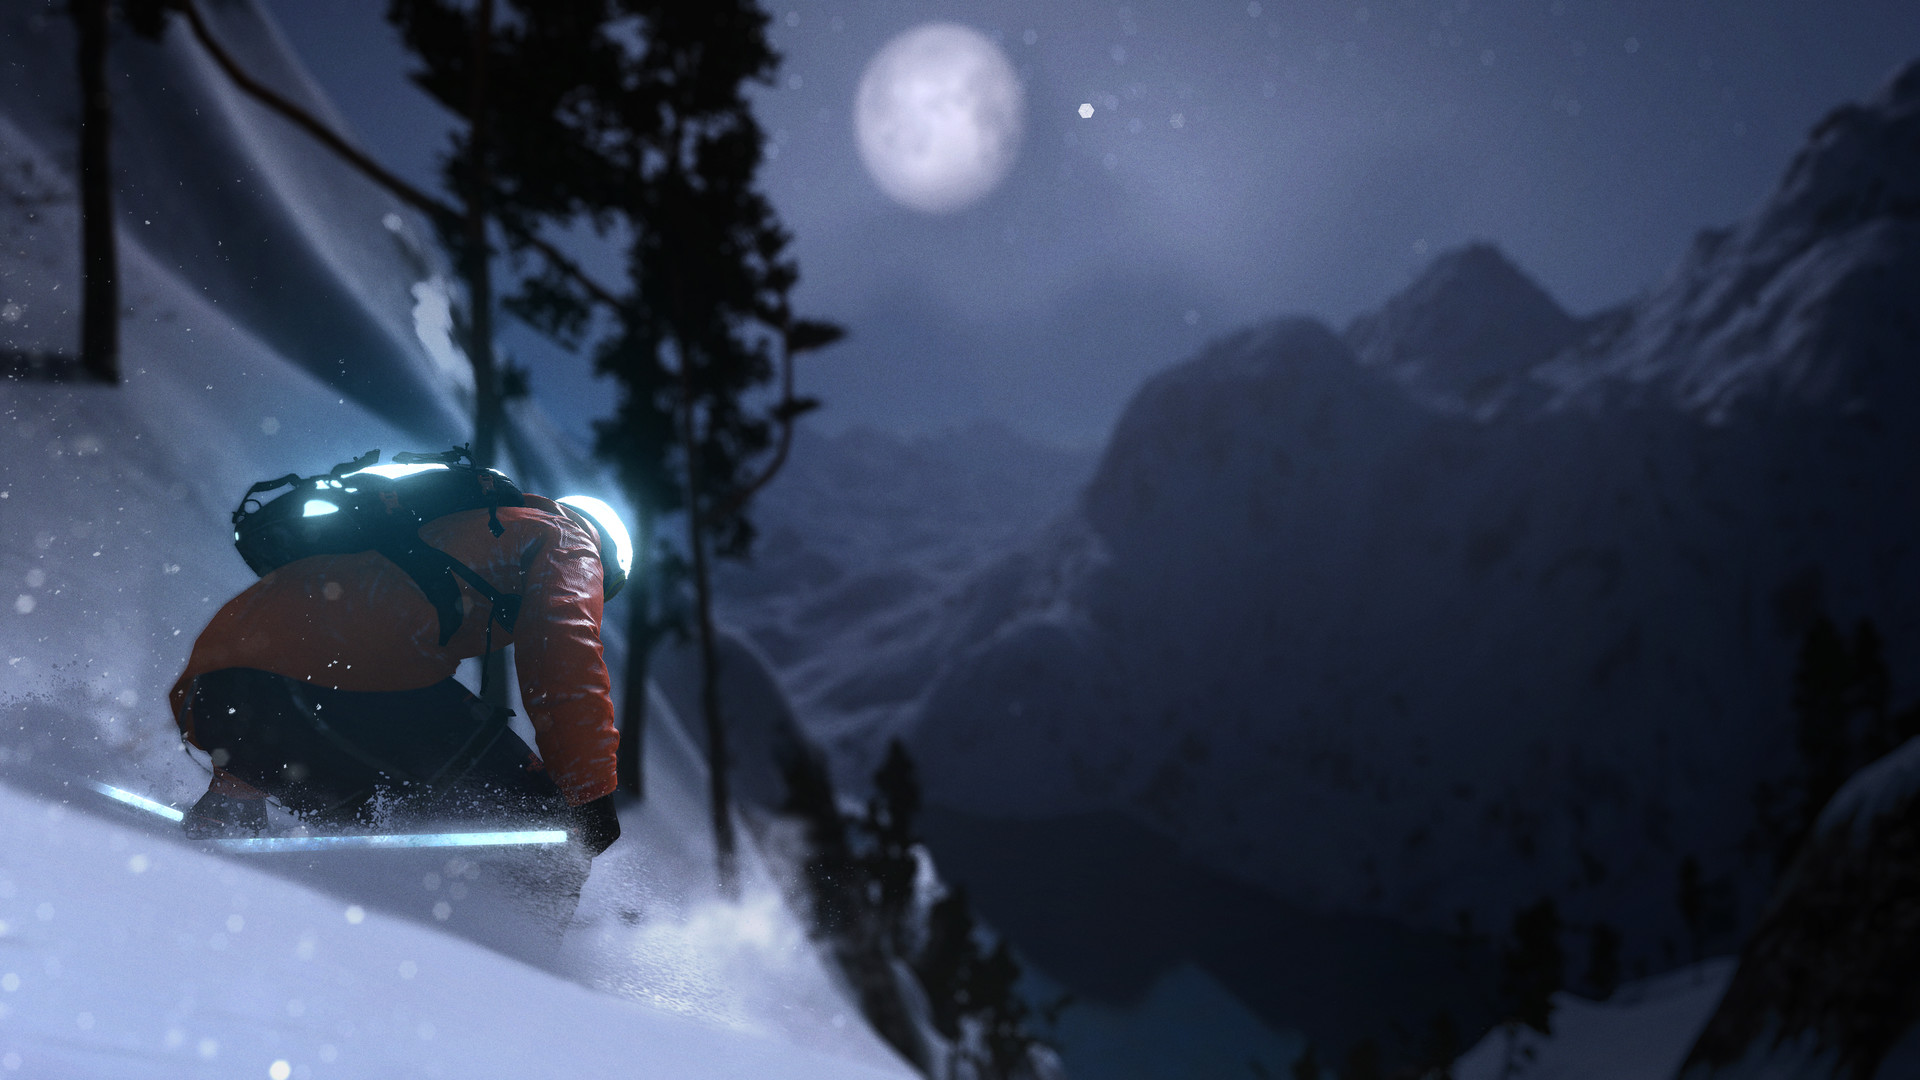 download steep